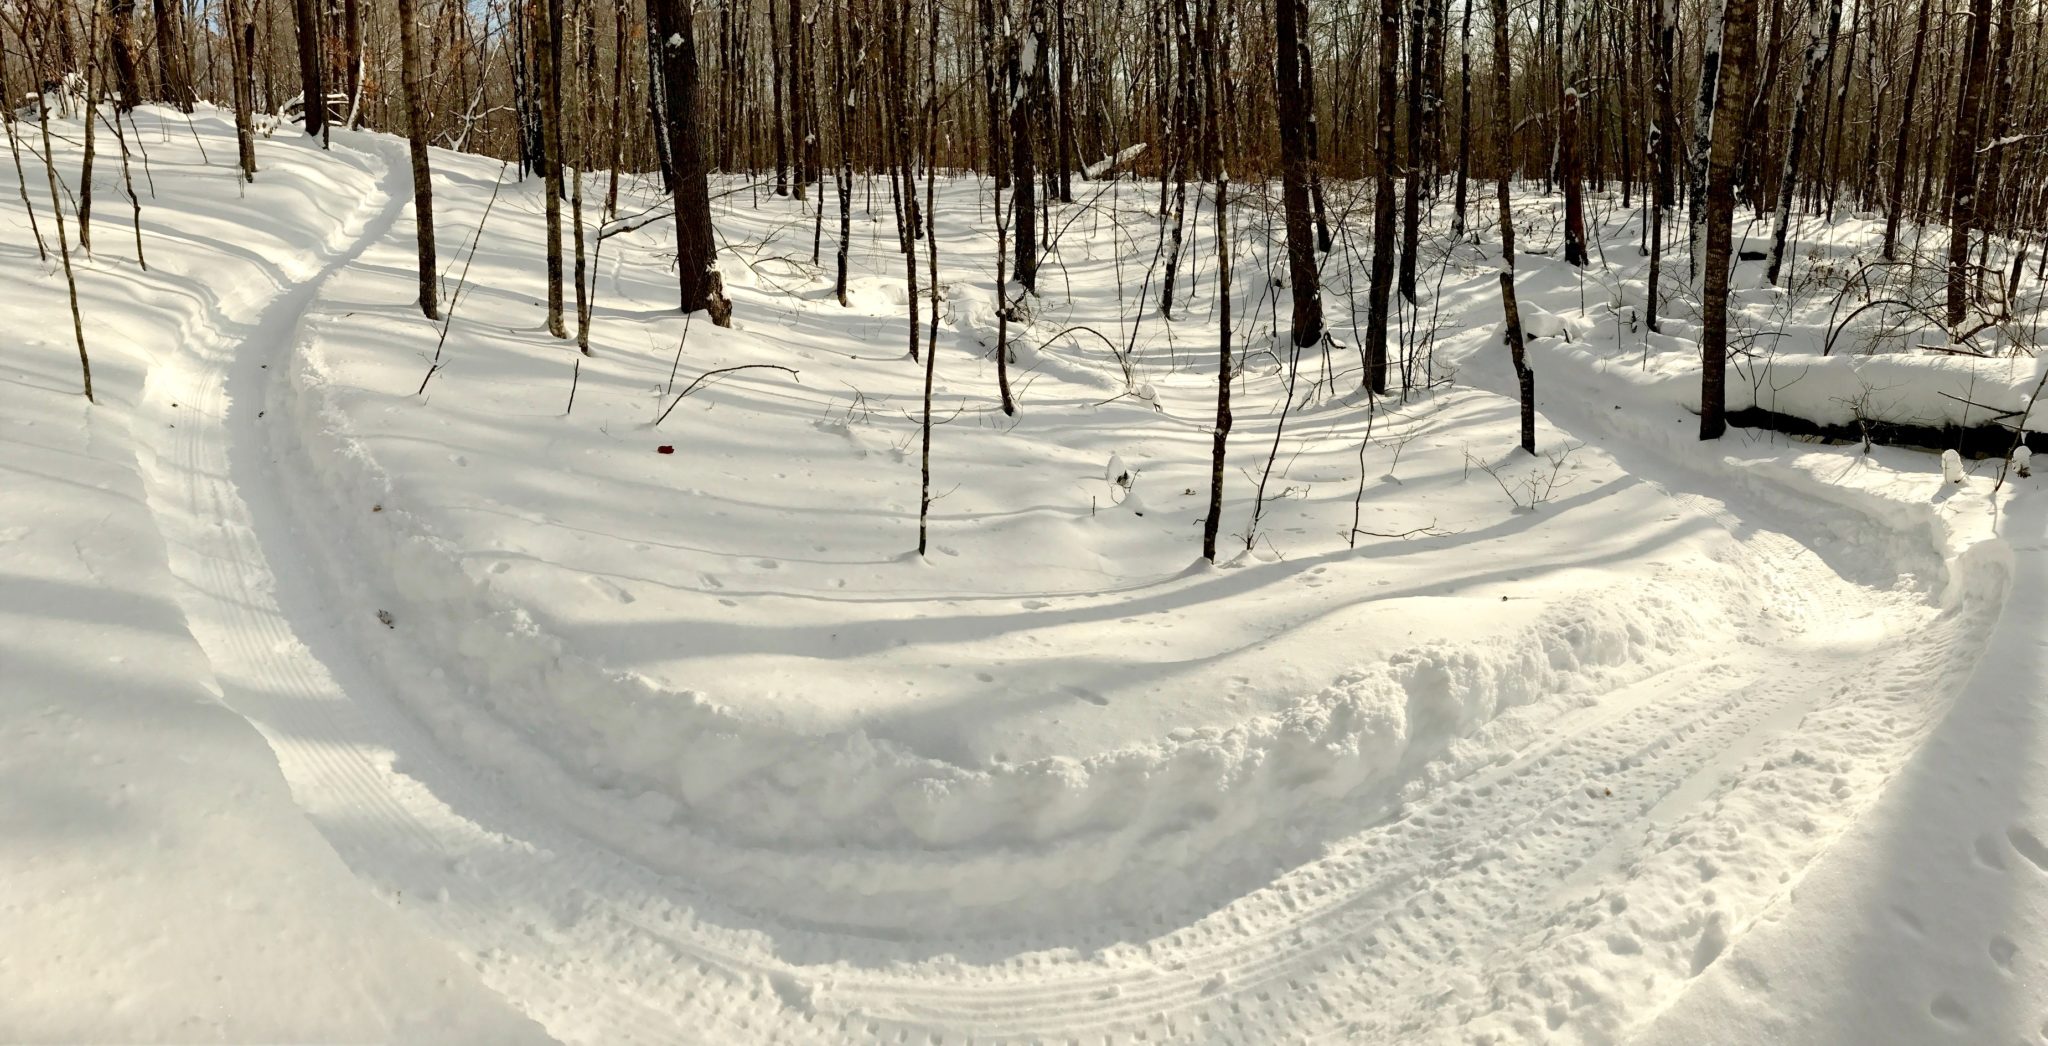 Great riding on the fat bike trail after setting up from grooming and a few riders riding it in. January 5th, 2016.